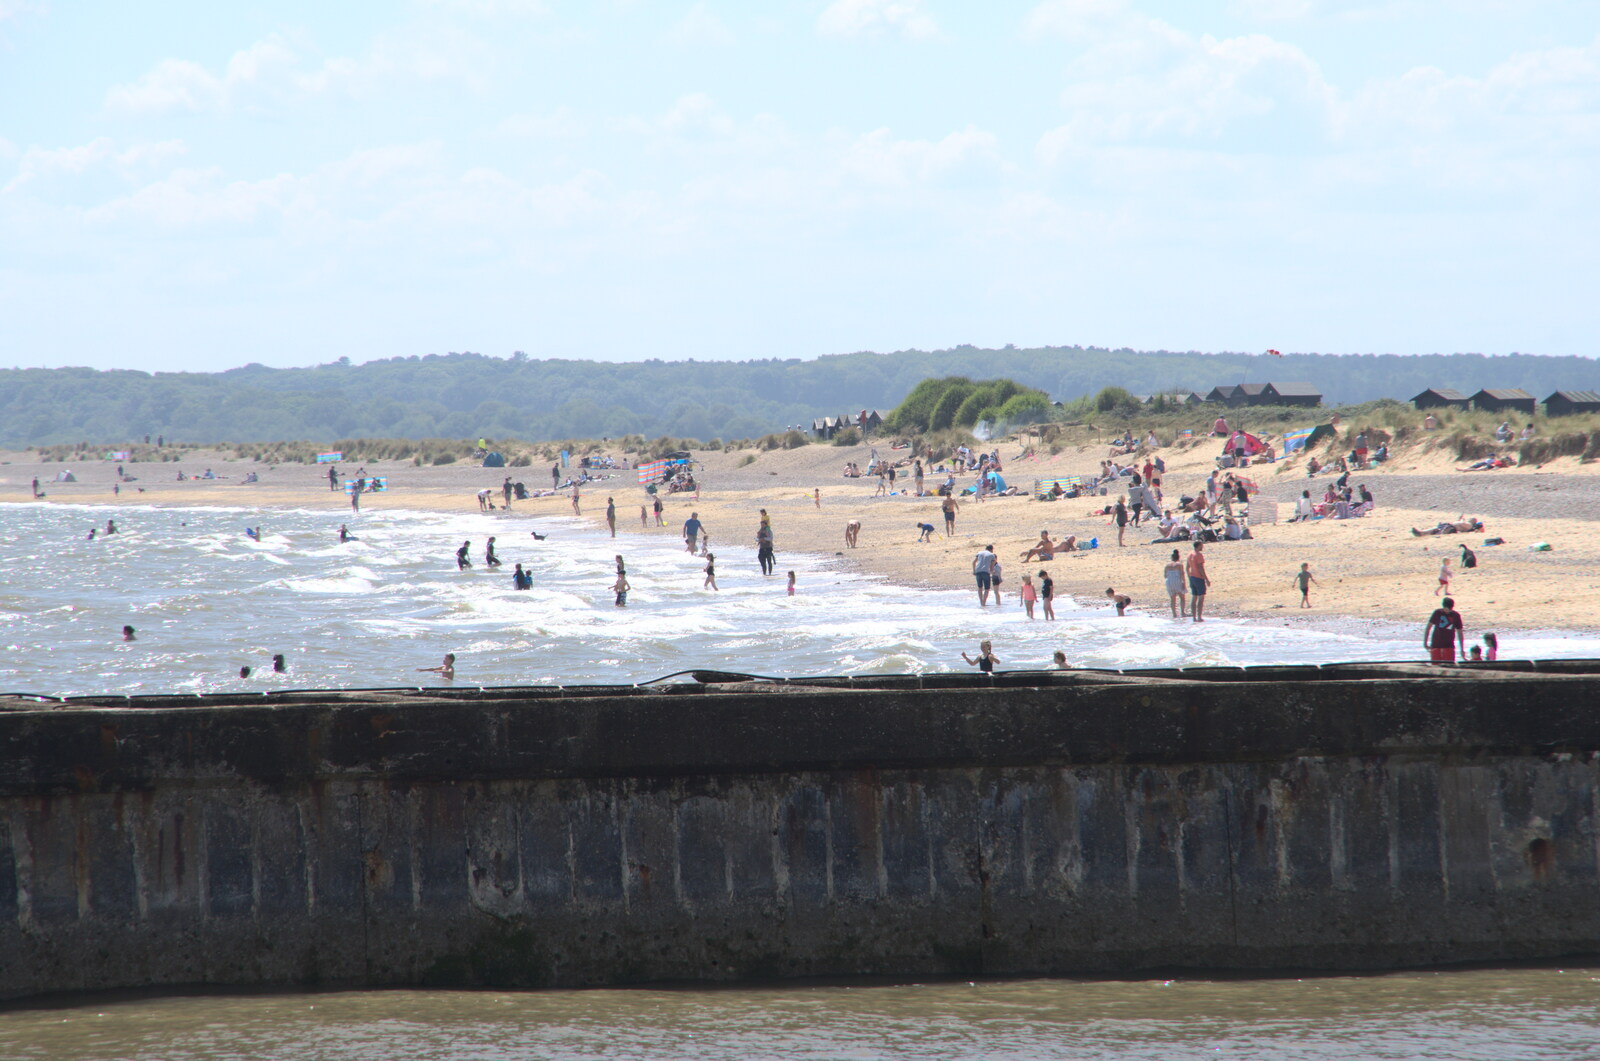 The sea and beach are busy over at Walberswick from A Return to Southwold, Suffolk - 14th June 2020